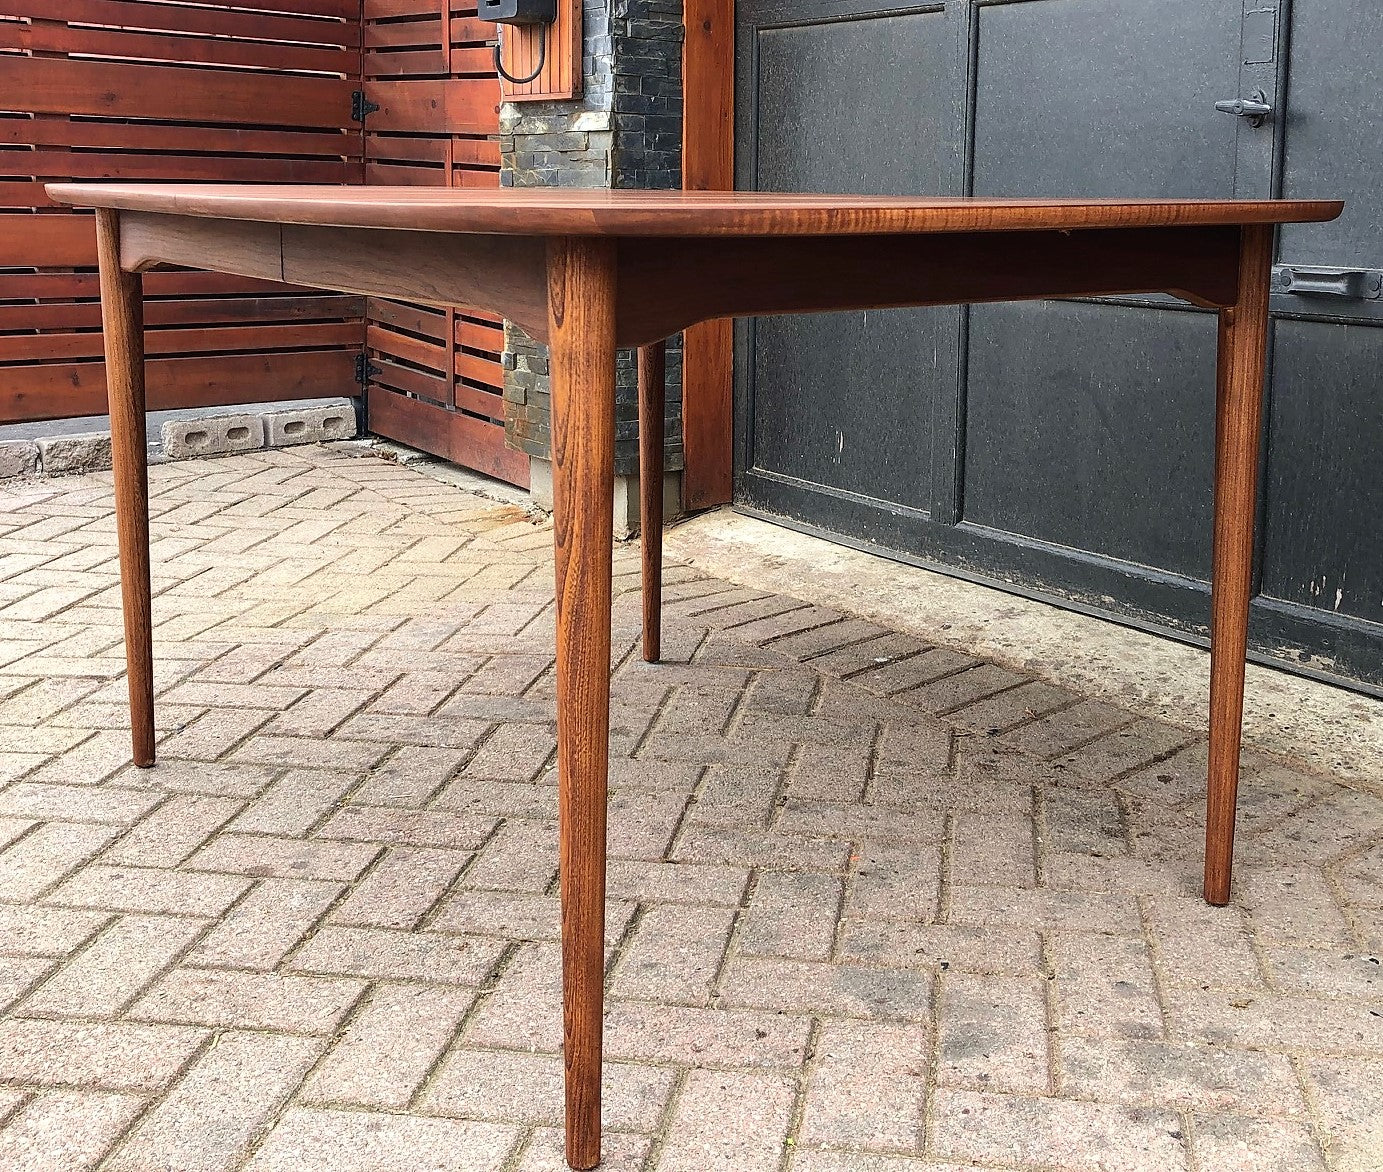 REFINISHED MCM Walnut Dining Table with butterfly extension 55" -72", PERFECT - Mid Century Modern Toronto